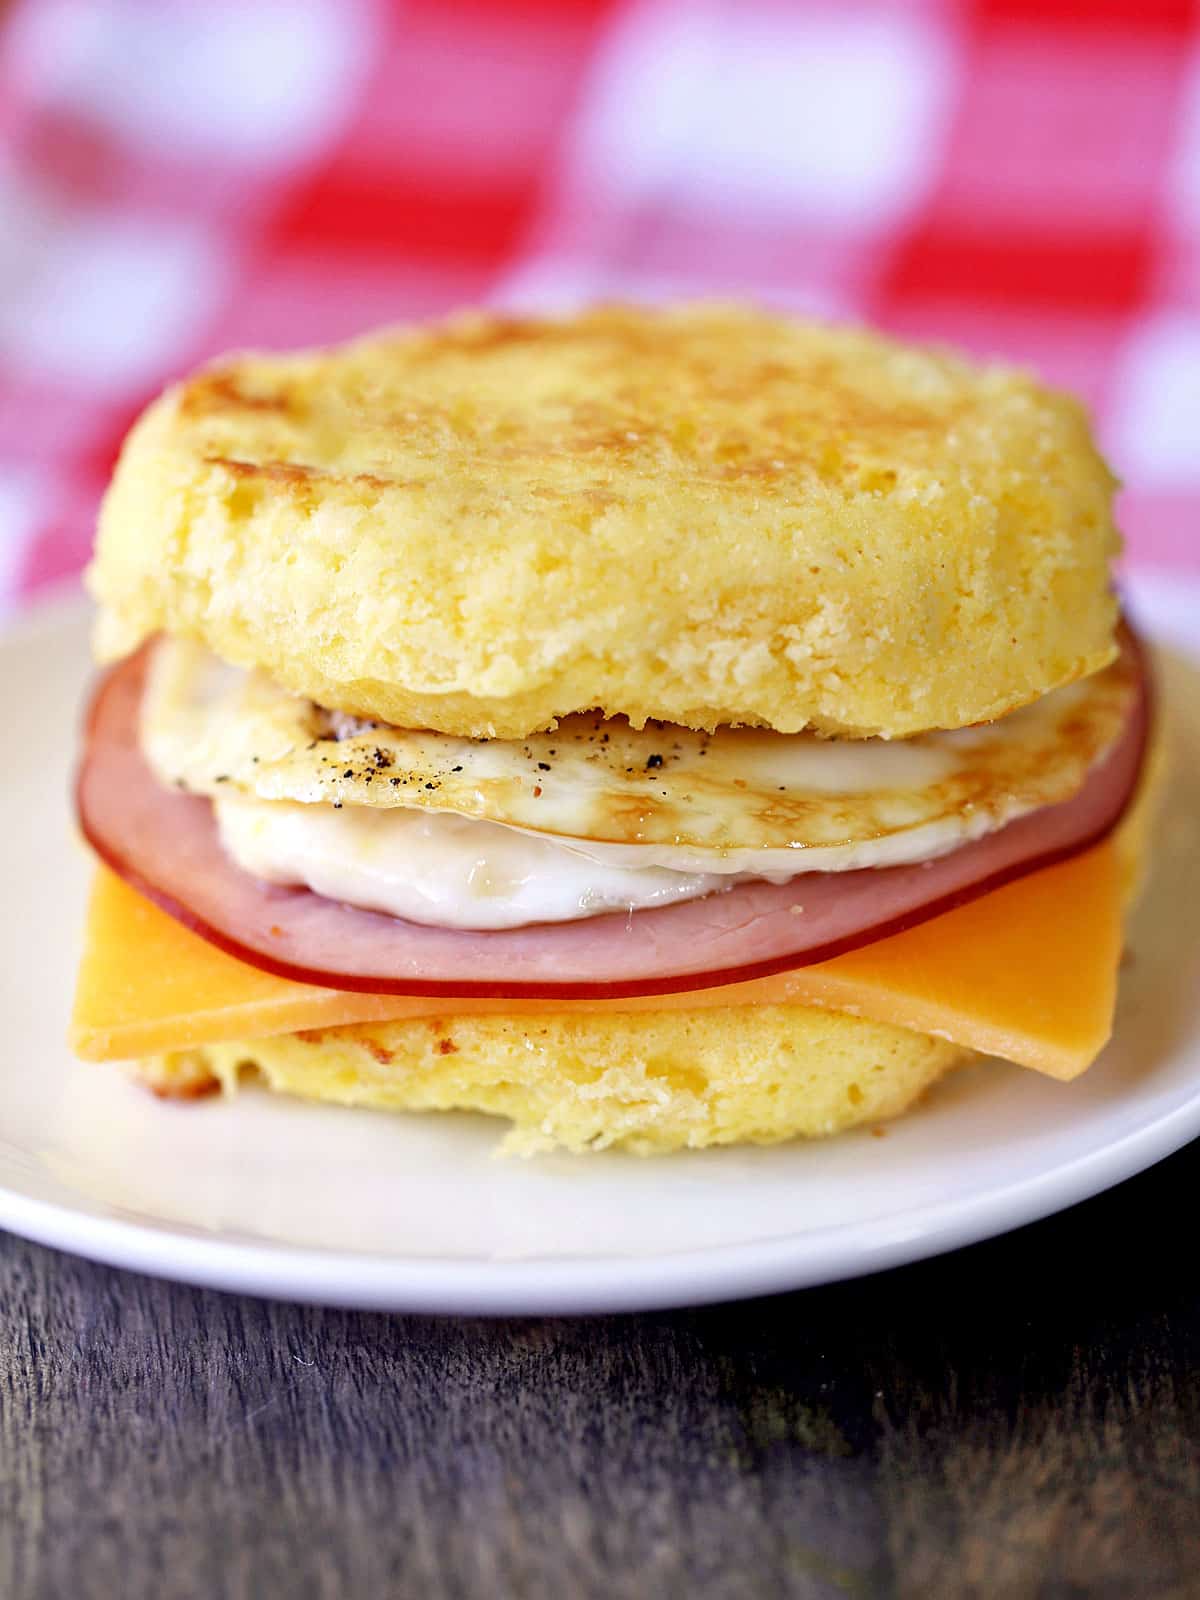 Keto breakfast sandwich served with a checkered red and white napkin. 